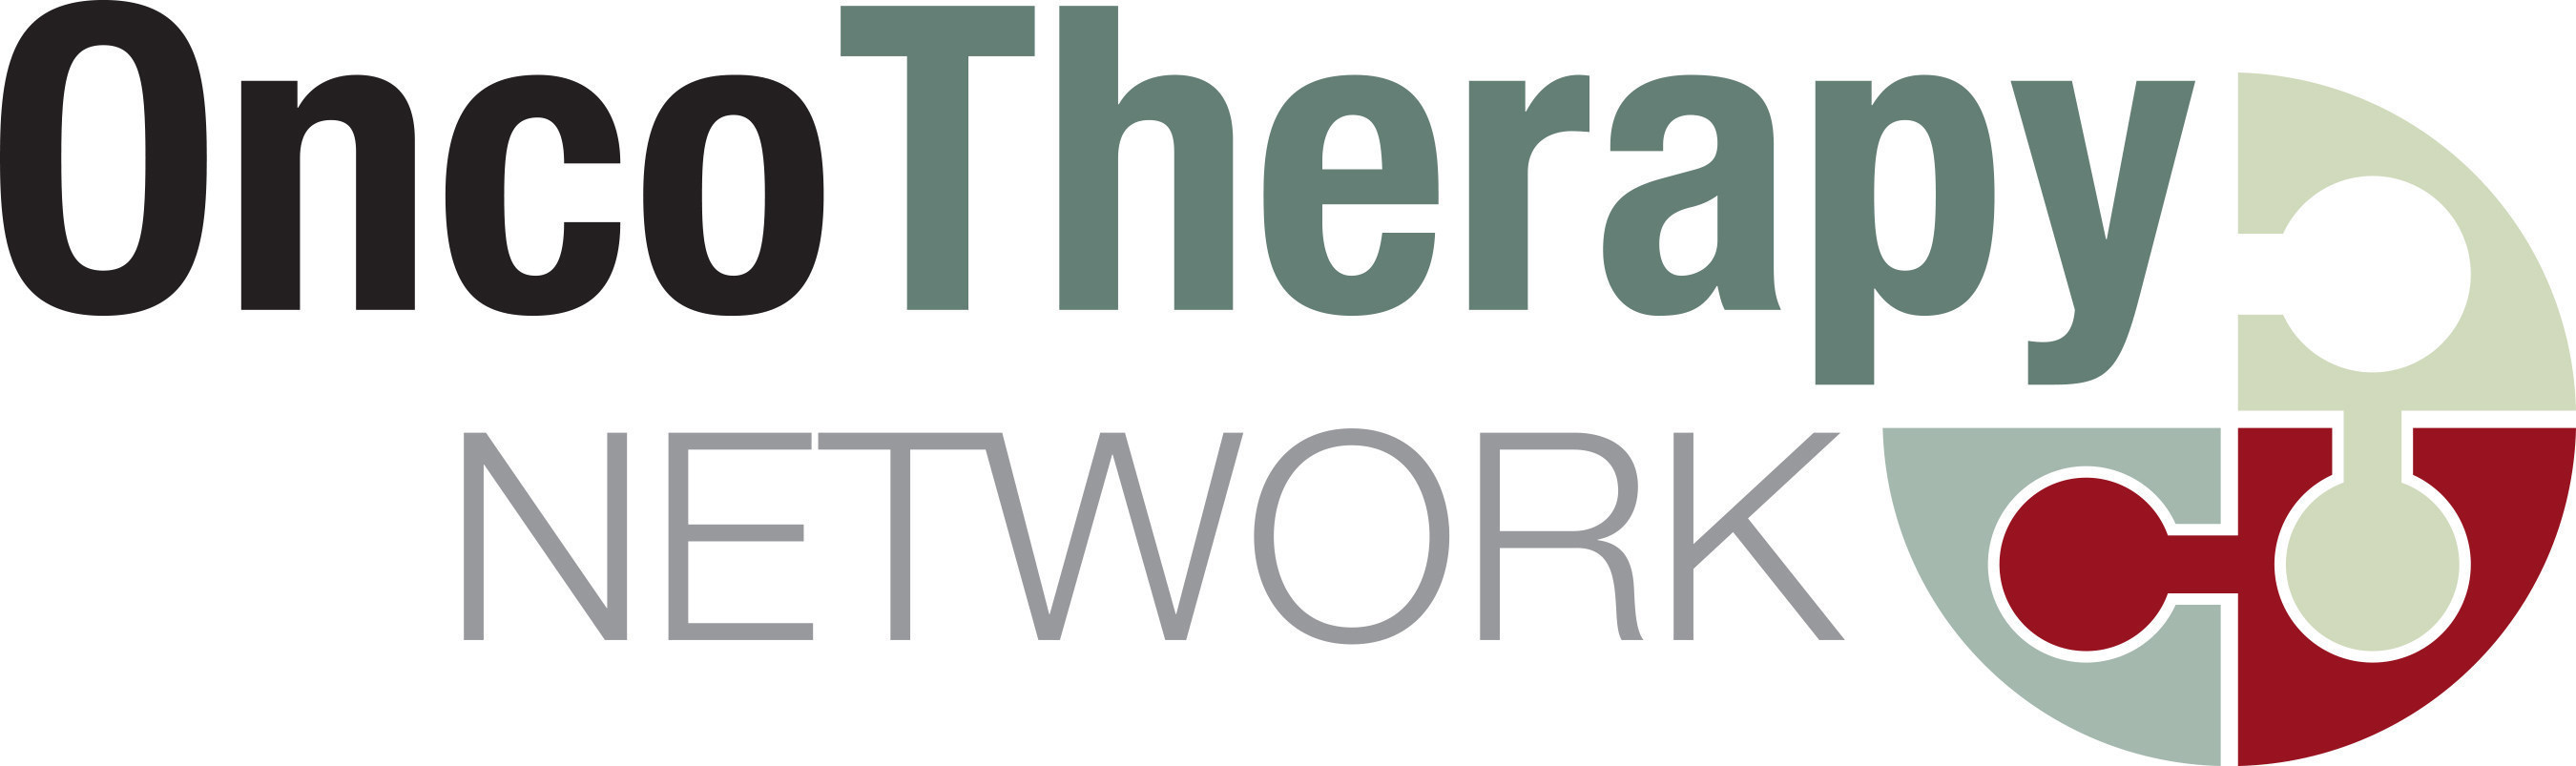 OncoTherapy Network Discusses the Reluctance to Undergo Cancer Treatment